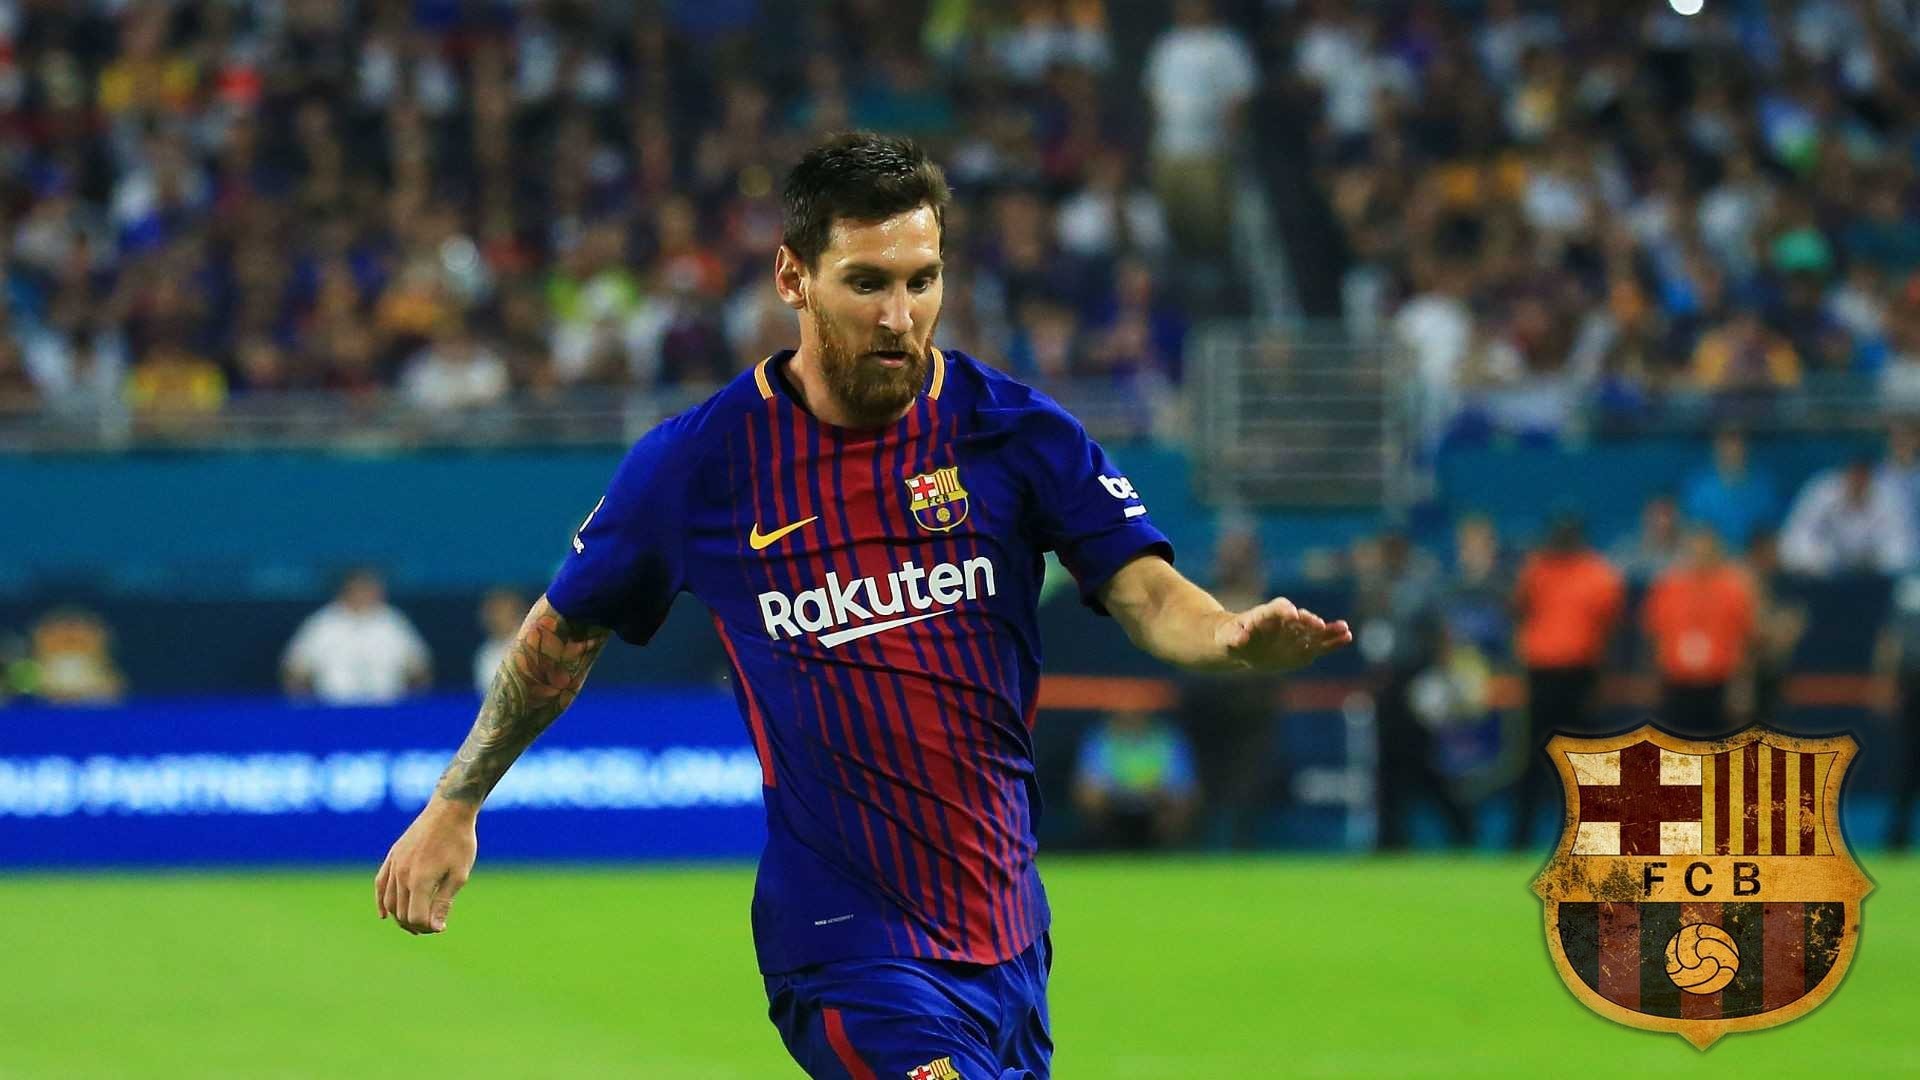 Leo Messi Wallpaper HD With Resolution 1920X1080 pixel. You can make this wallpaper for your Mac or Windows Desktop Background, iPhone, Android or Tablet and another Smartphone device for free